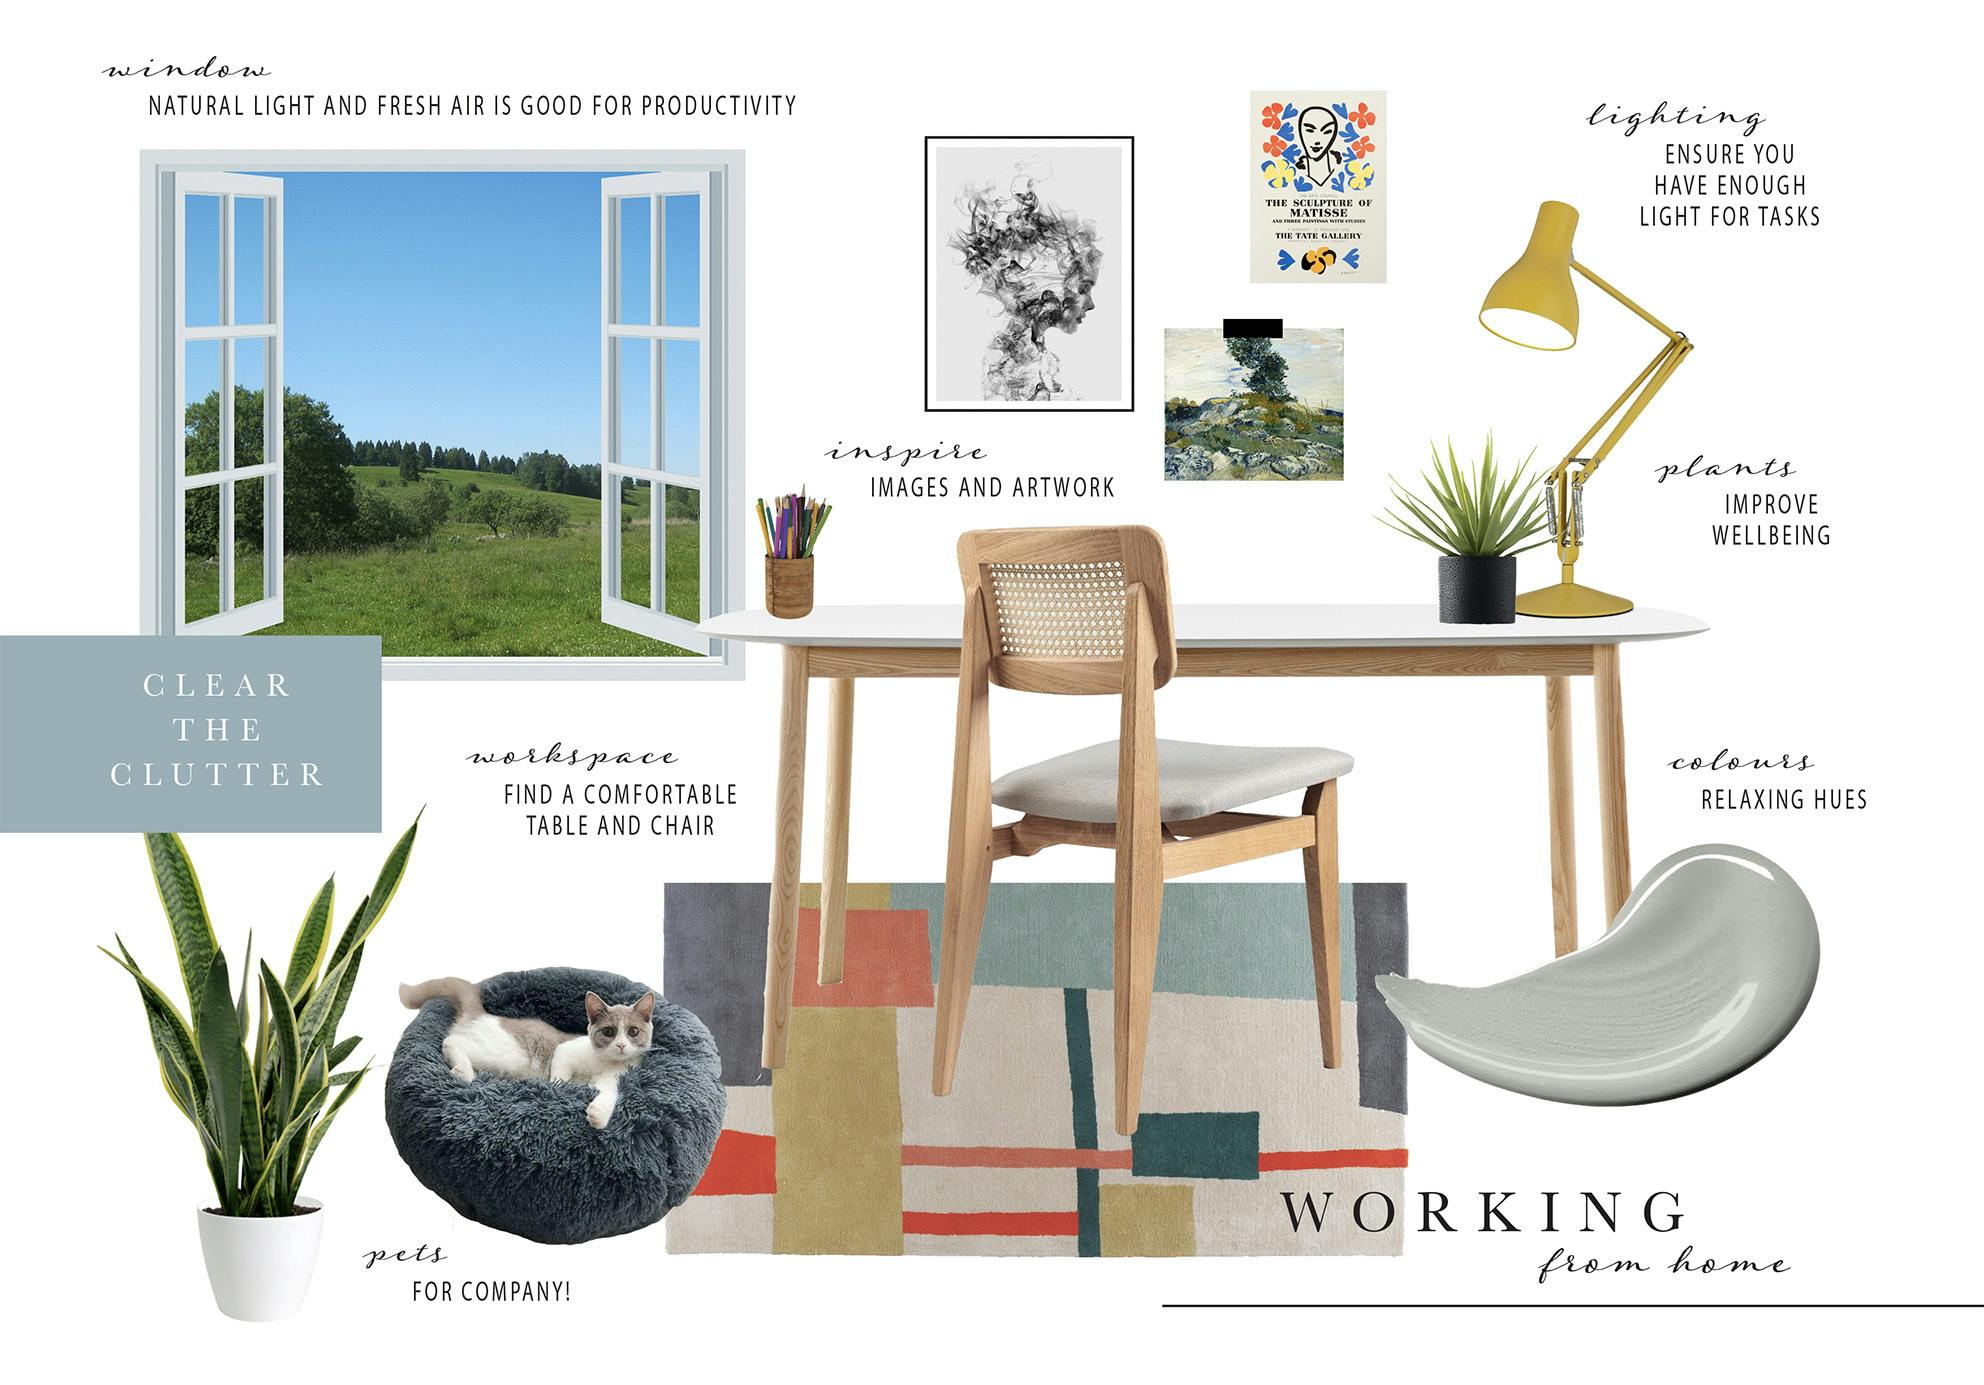 Working From Home Moodboard created by Jemma Barnard BA (Hons) Interior Decoration, Design and Styling